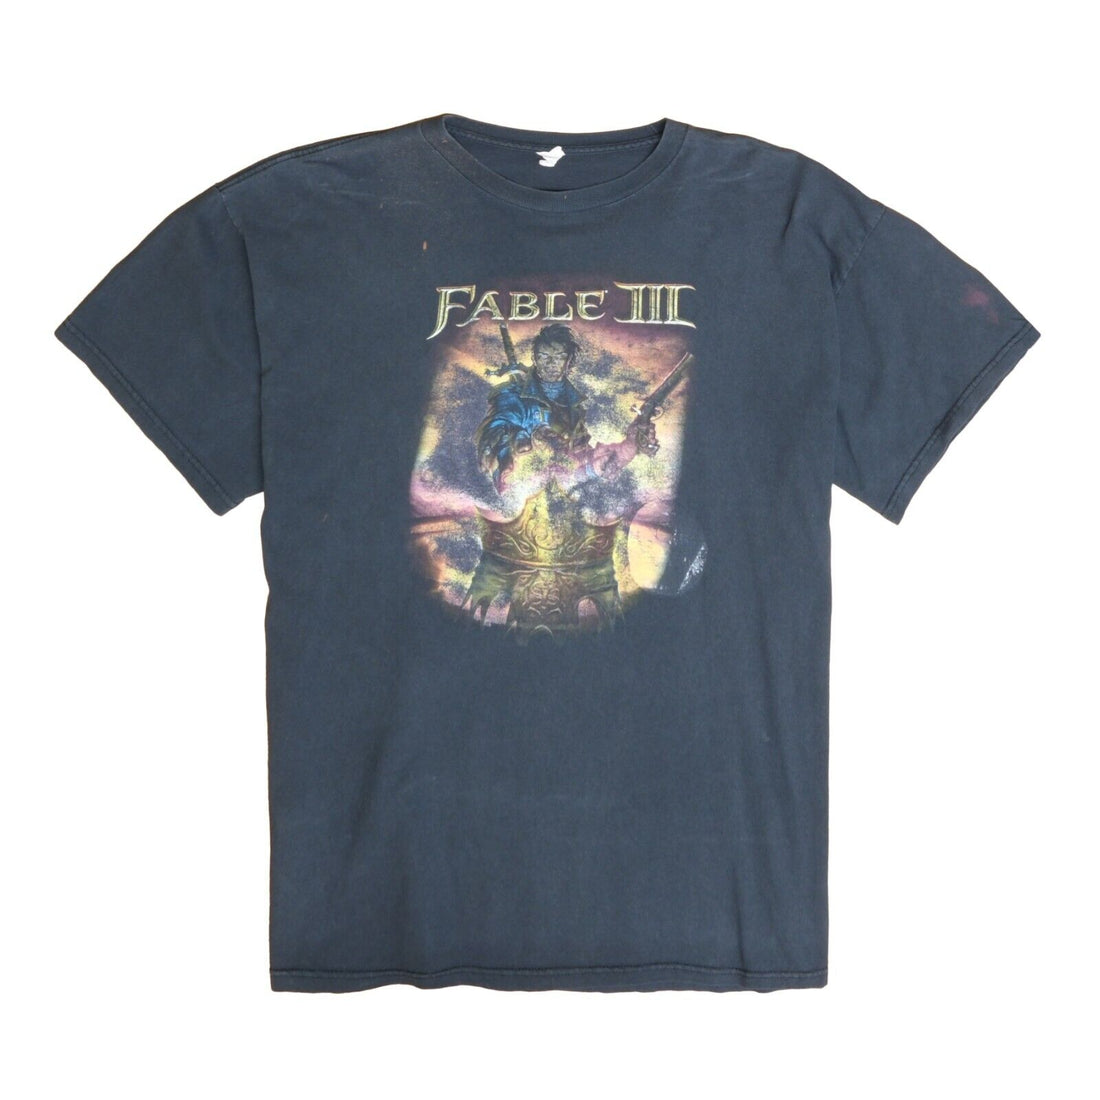 Vintage Fable III Xbox 360 T-Shirt Size XL Video Game Promo